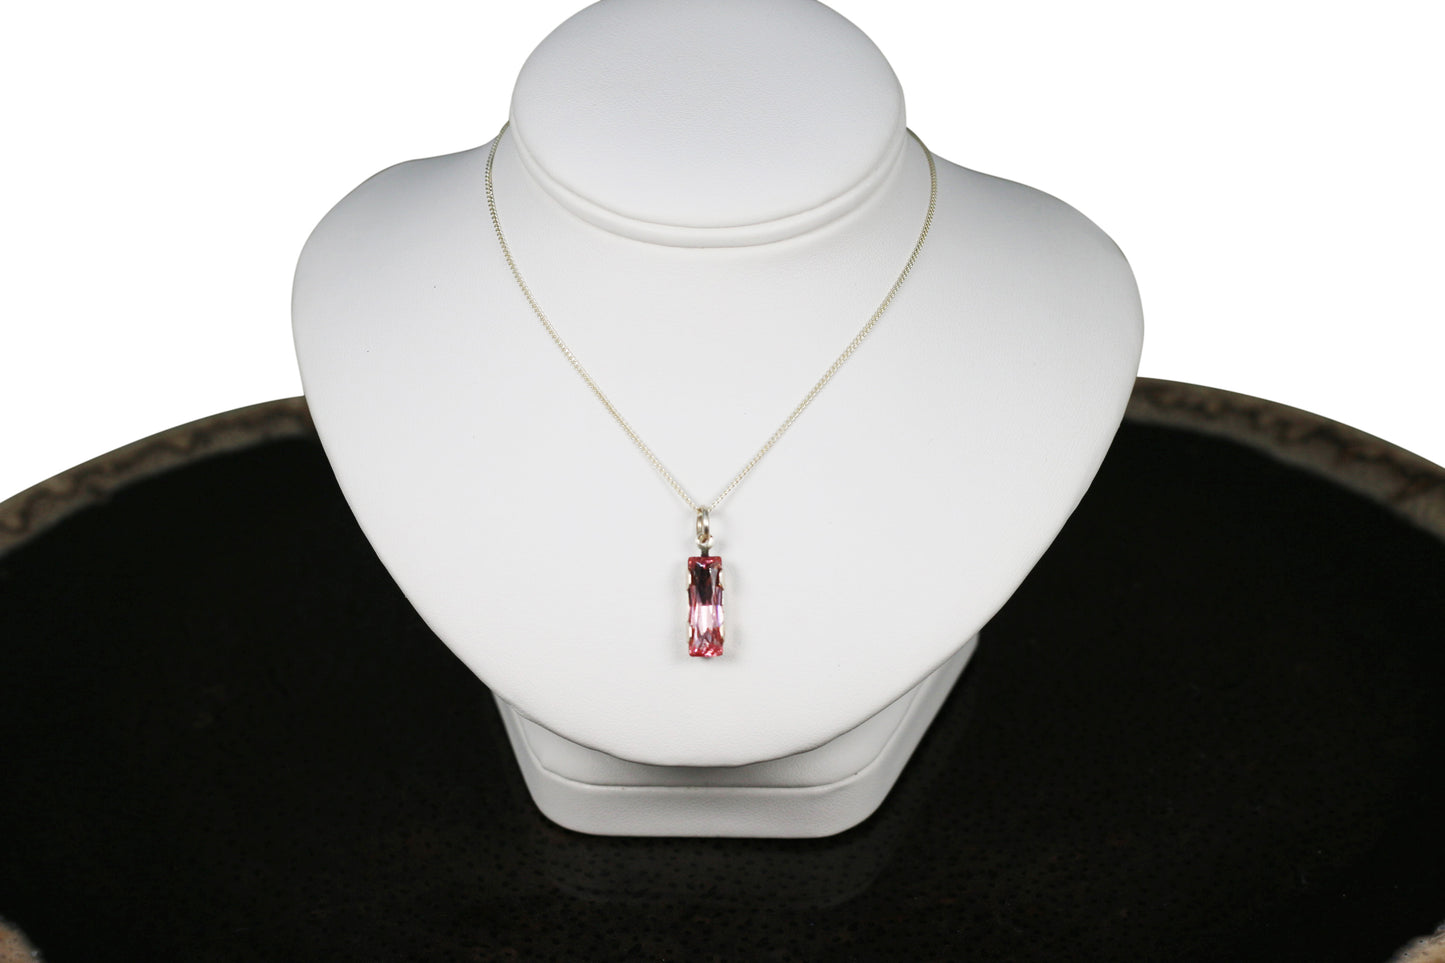 Sterling Silver Cable Chain Necklace with Rose Pink Austrian Crystal Pendant and Sterling Silver Component